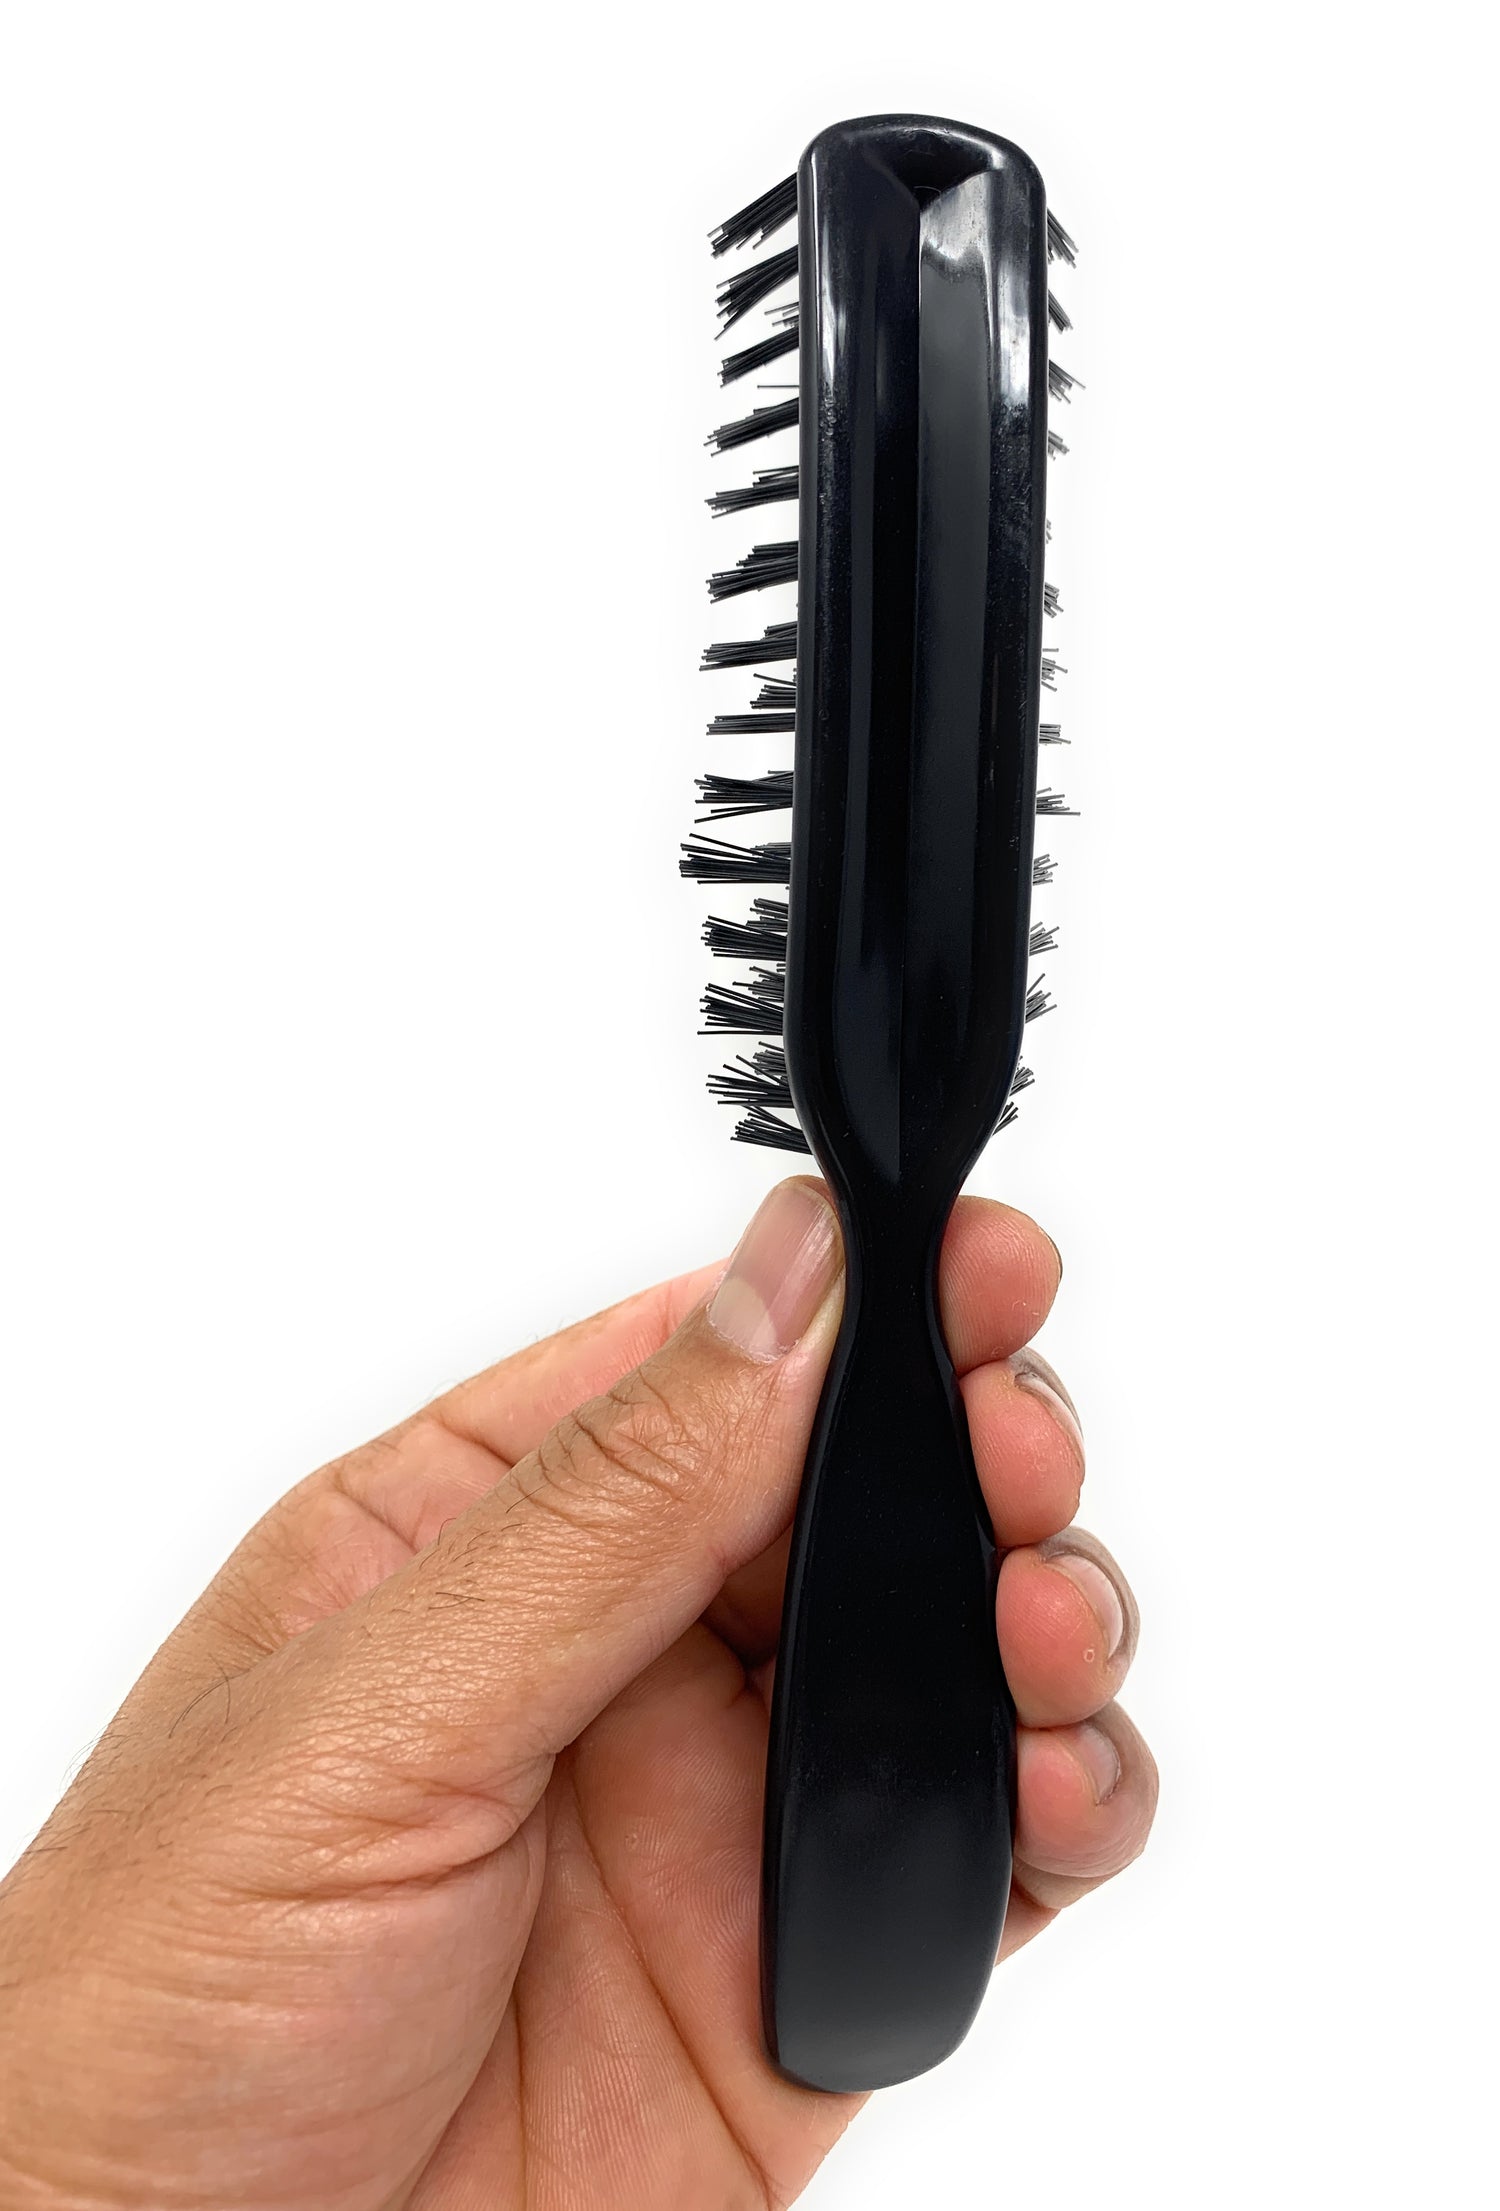  Scalpmaster Brush/Comb Cleaner : Makeup Brush Cleaners :  Beauty & Personal Care